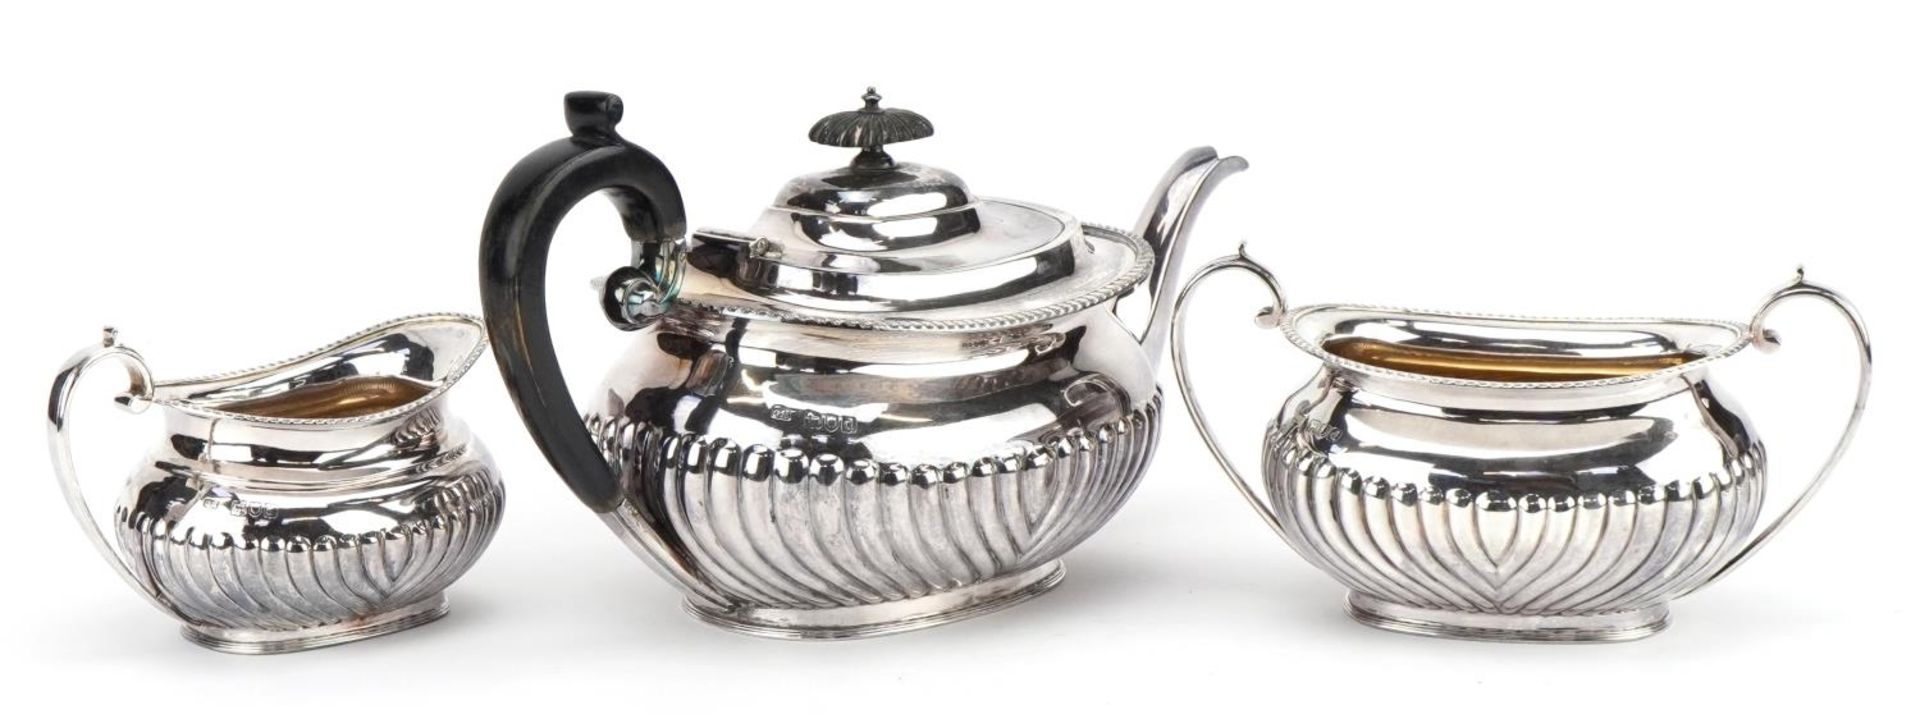 Victorian silver three piece tea service, the teapot with wooden handle and knop, G H maker's mark - Image 2 of 4